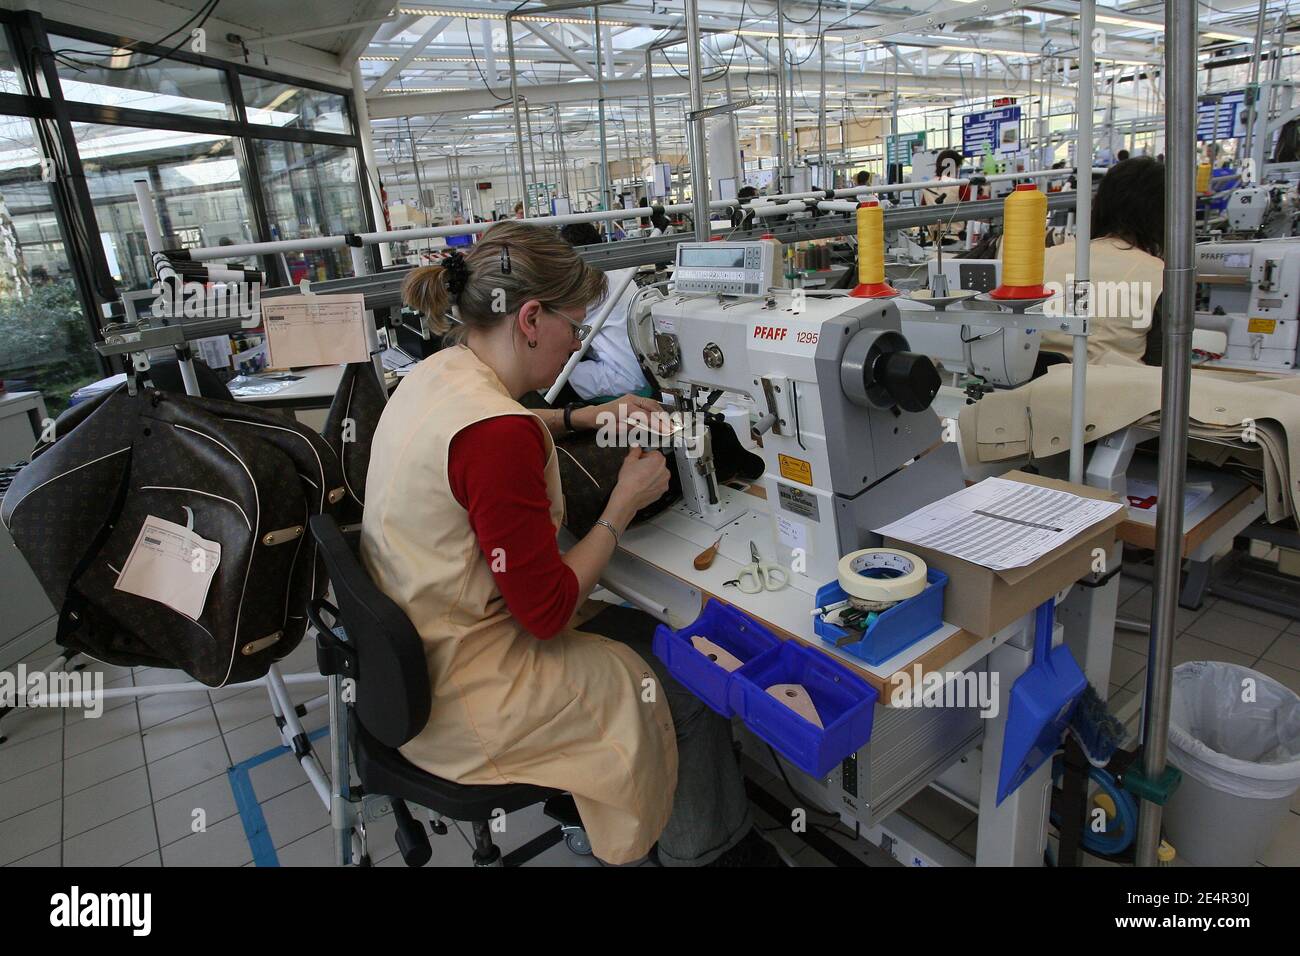 Illustration of the manufacture of Louis Vuitton in Saint-Pourcain-sur-Sioule,  France on February 26, 2008. Photo by Mousse/ABACAPRESS.COM Stock Photo -  Alamy